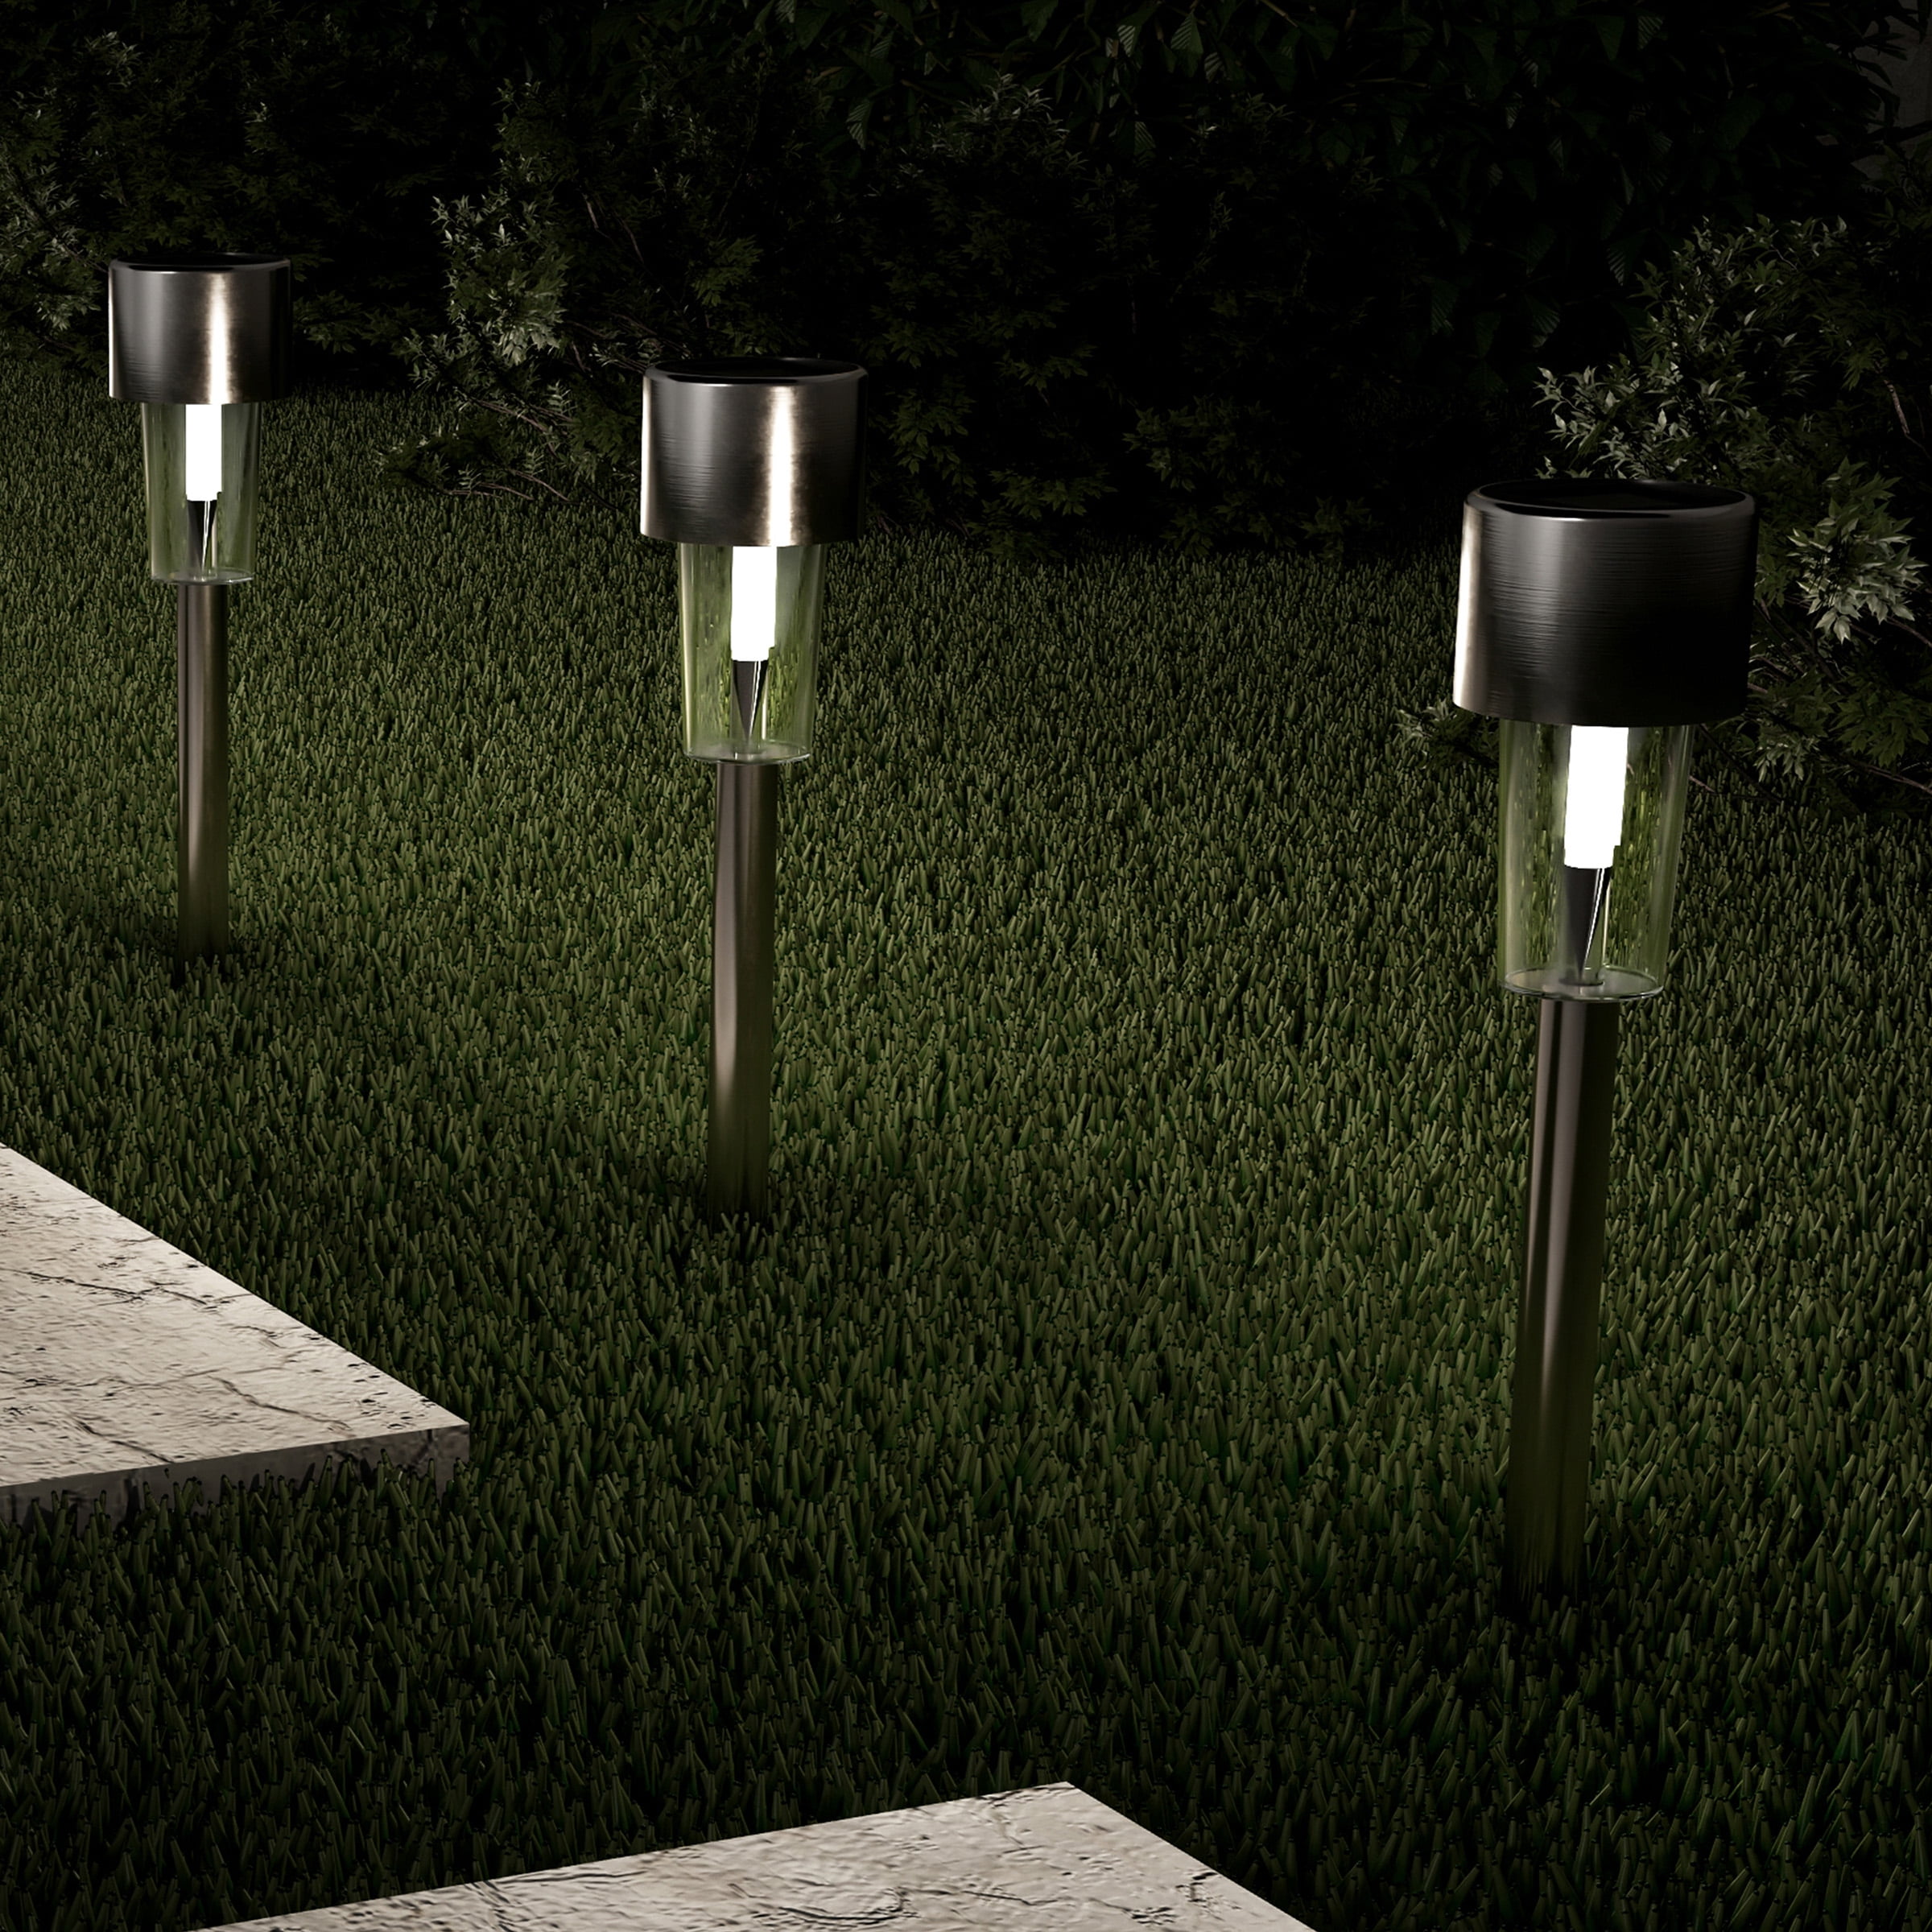 10x Colour Changing Stainless Steel Solar Powered Garden Lawn Path Patio Lights 